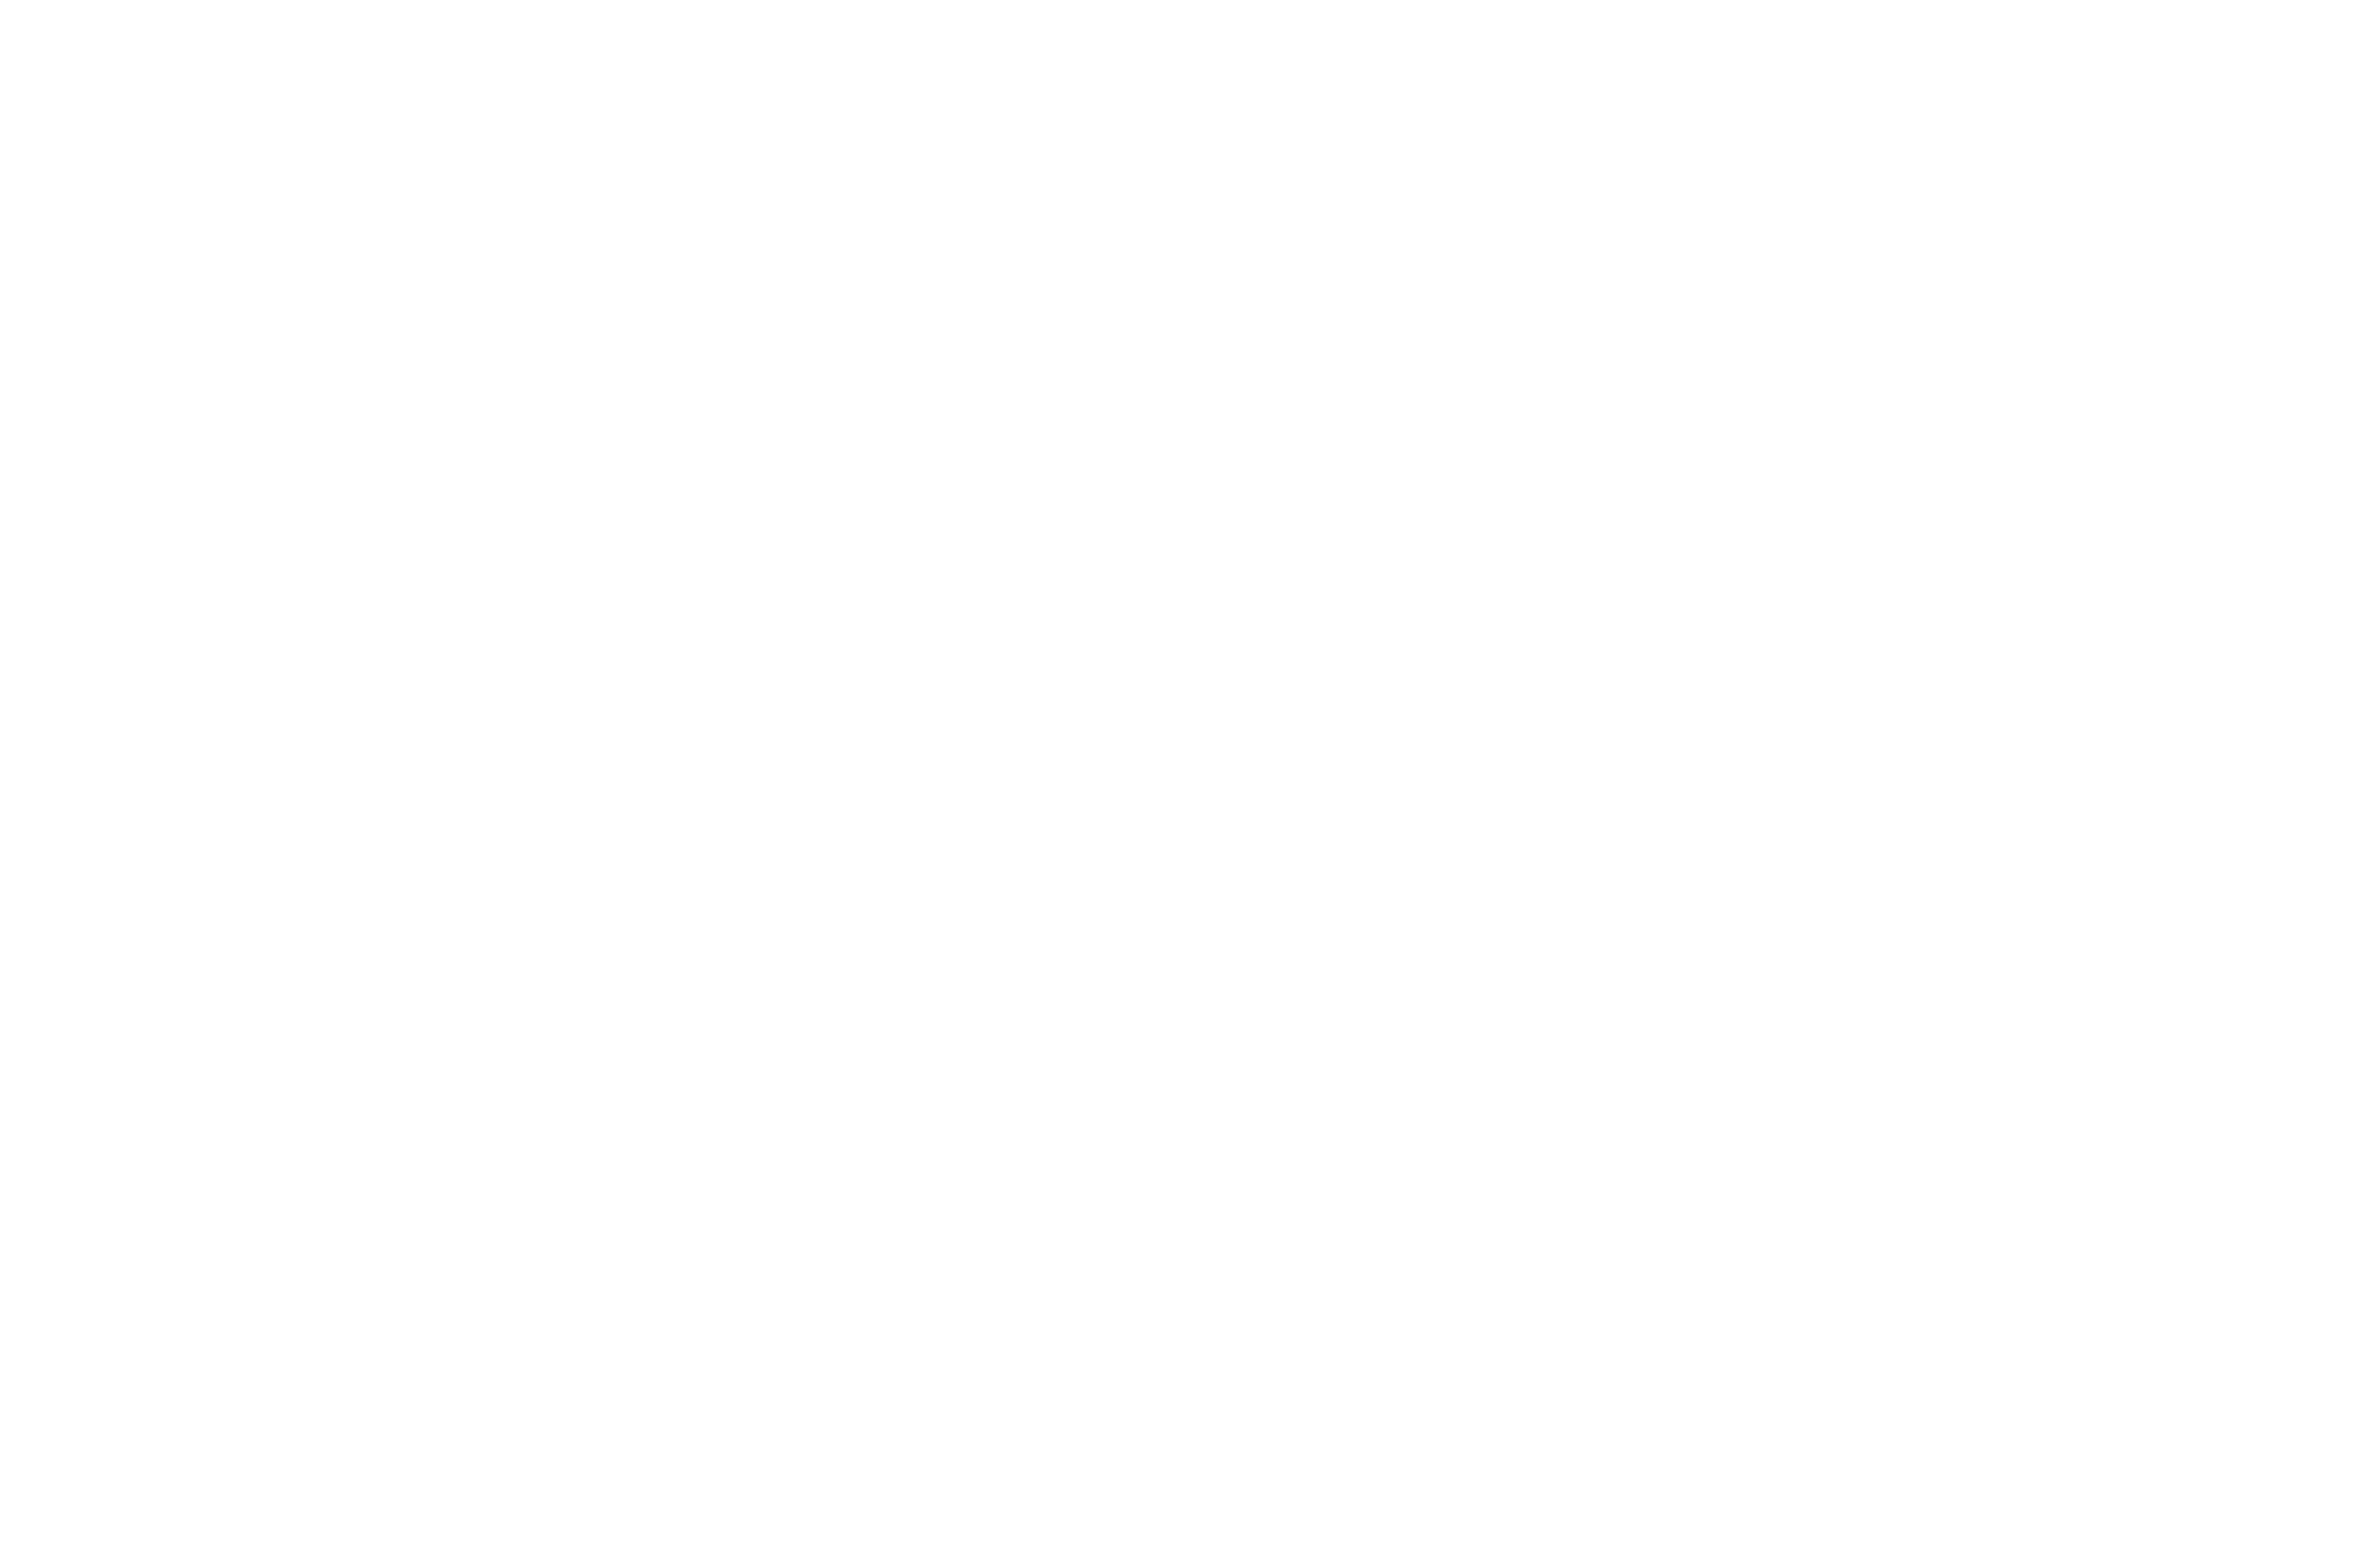 Thursday in March